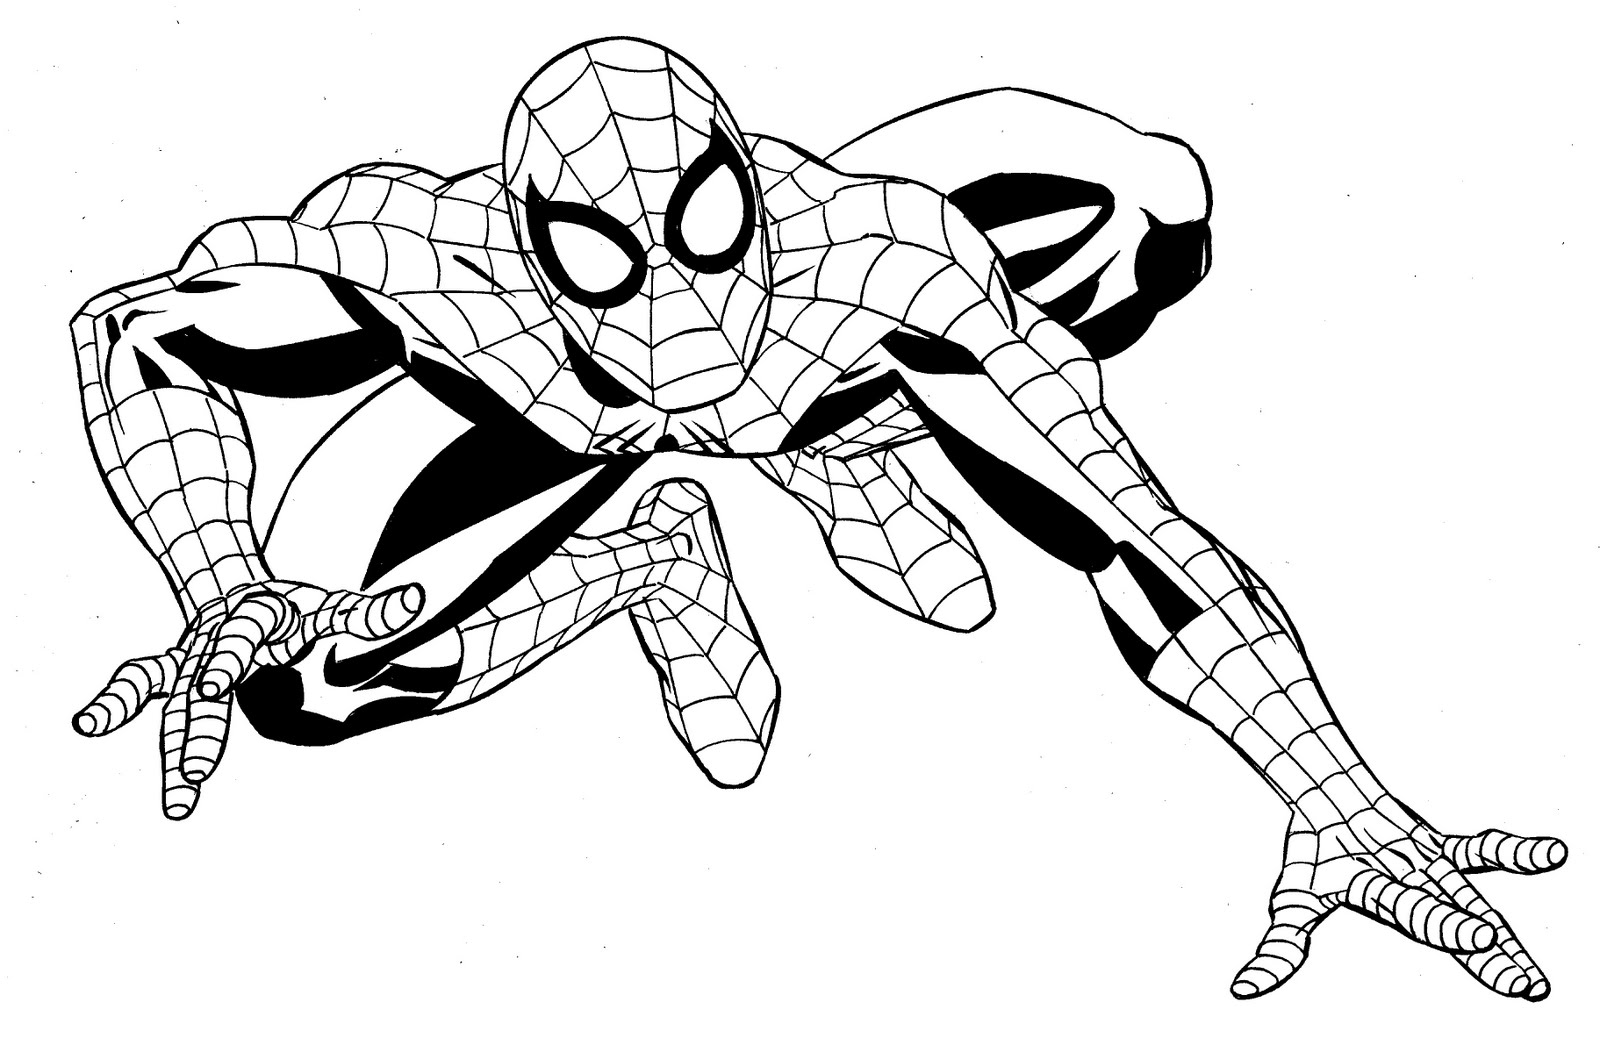 Free Marvel Superheroes Coloring Pages Coloring Wallpapers Download Free Images Wallpaper [coloring436.blogspot.com]